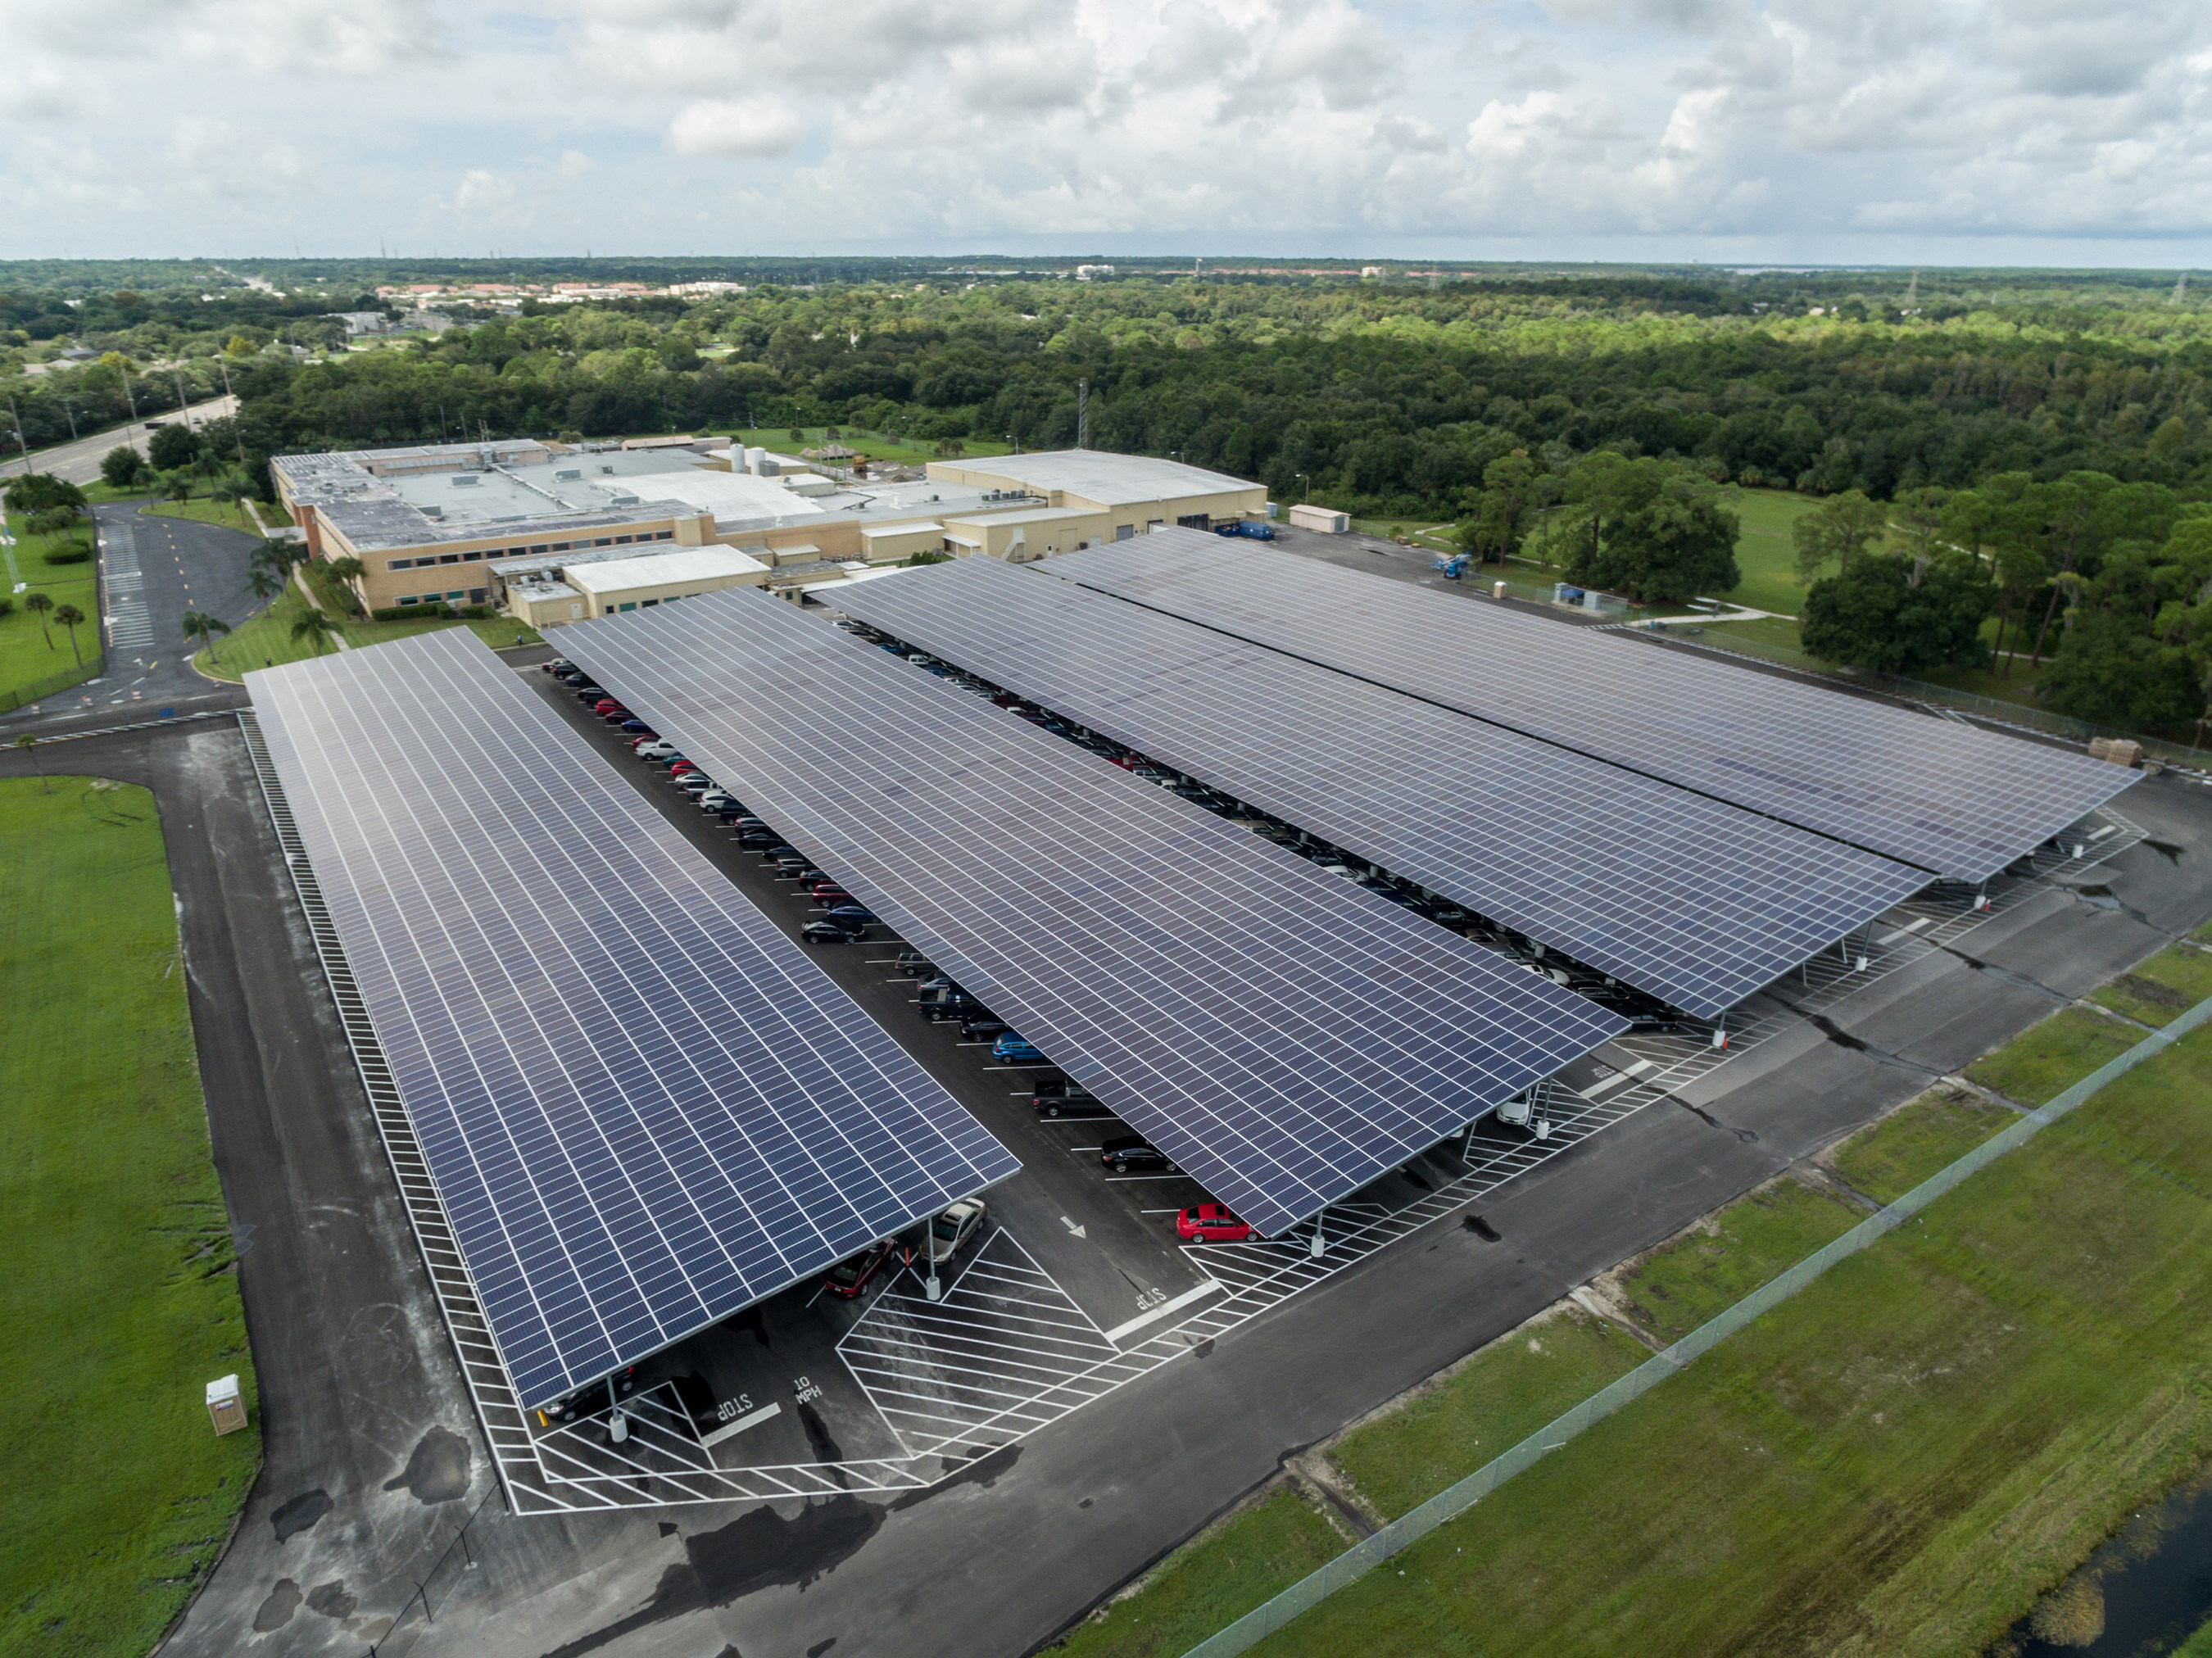 Lockheed Martin's parking solar array, completed in September 2015, will cut energy costs by up to 60 percent, greenhouse gas emissions by 35 percent and energy use by 25 percent by the year 2020.